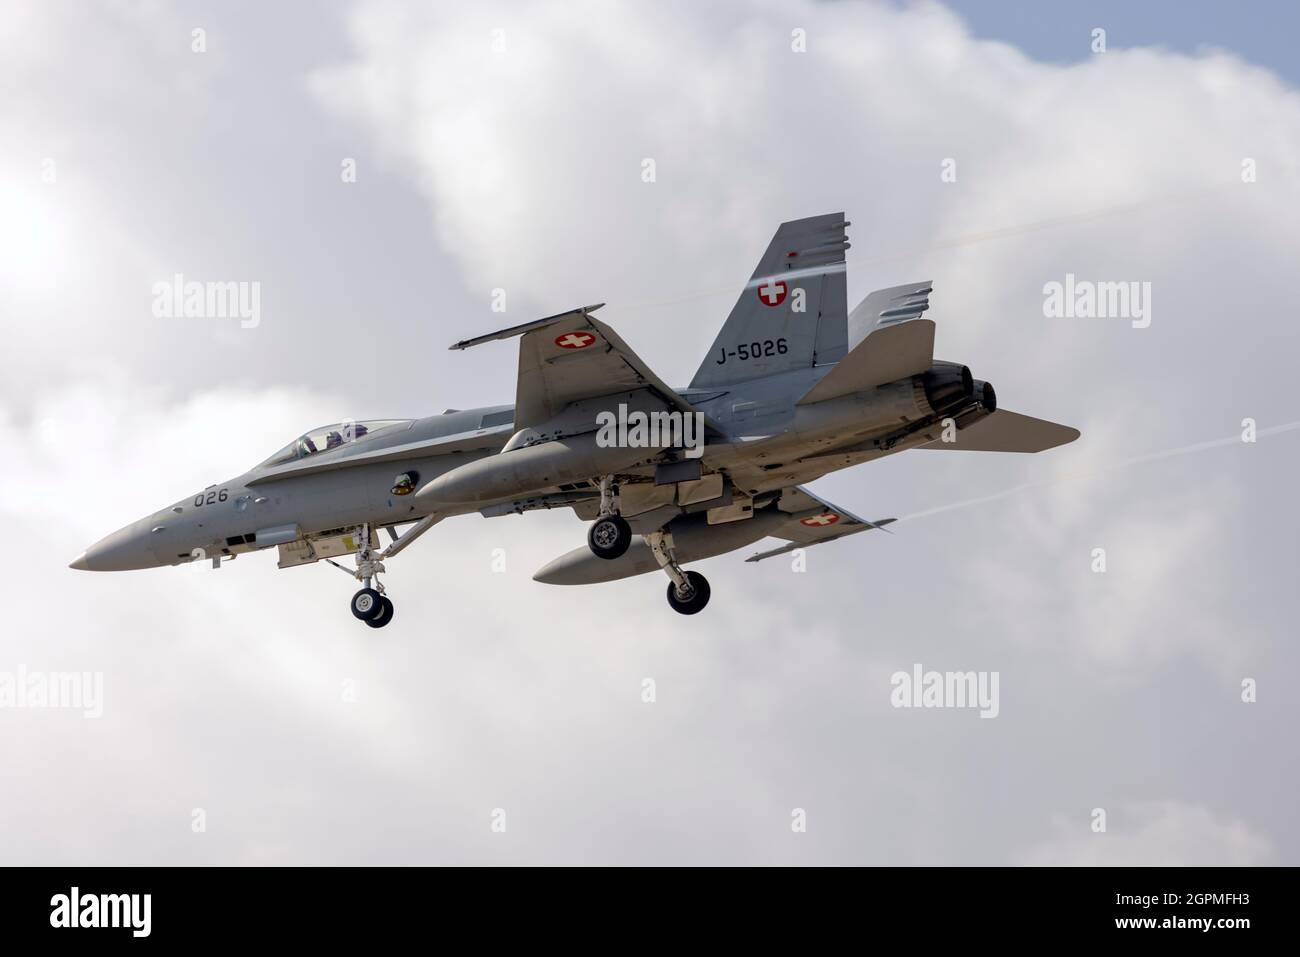 Swiss Air Force McDonnell Douglas FA-18C Hornet (REG: J-5026) landing runway 13, for the Airshow the coming weekend. Stock Photo